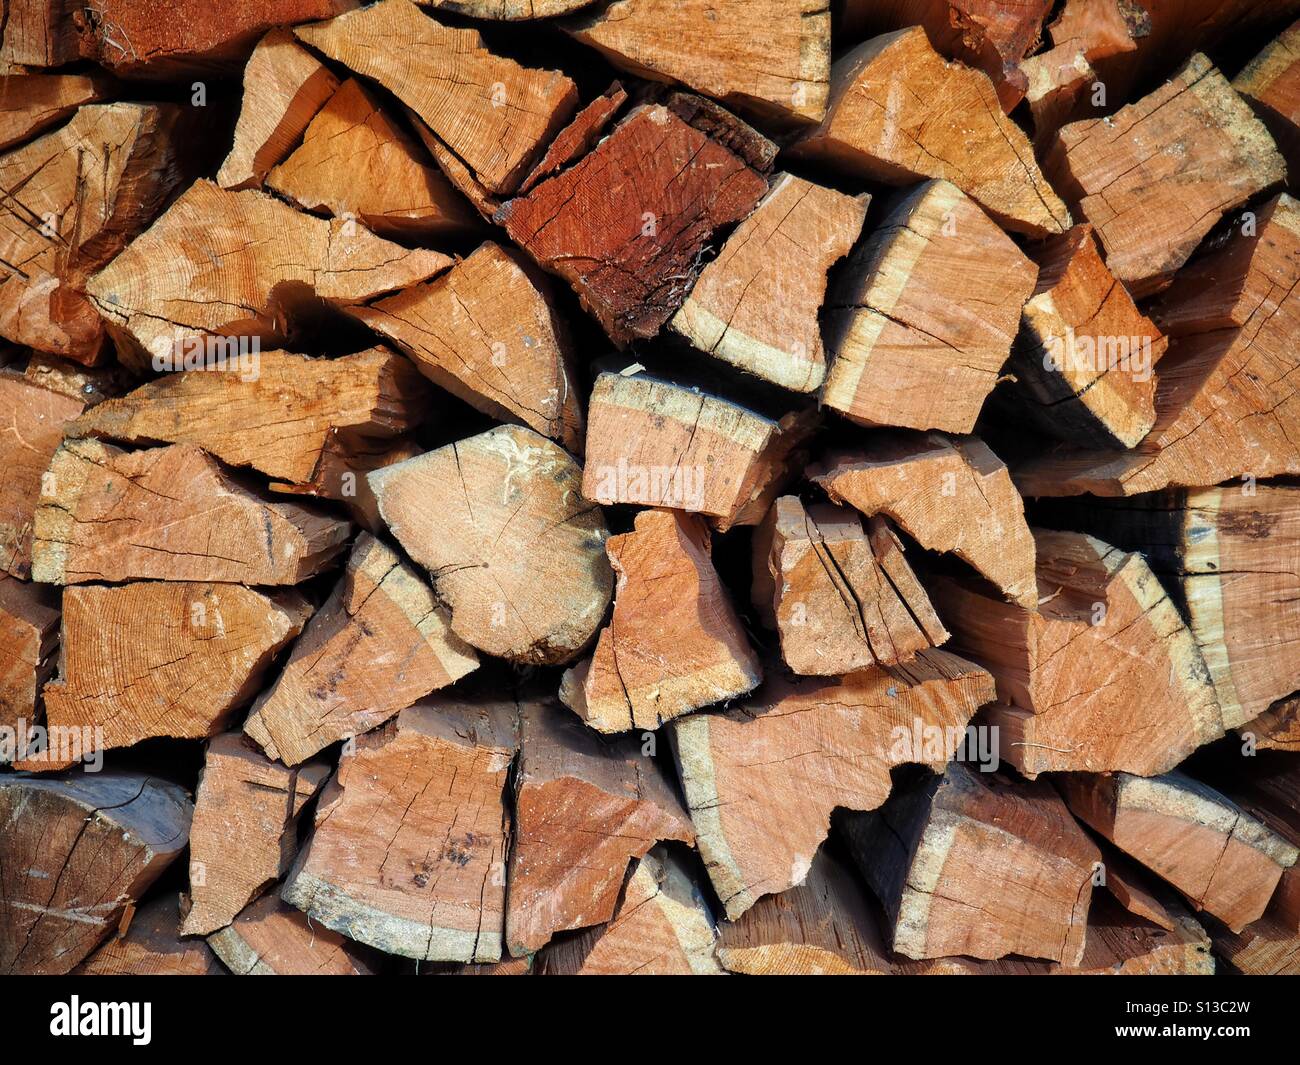 Cut and dried. Stock Photo